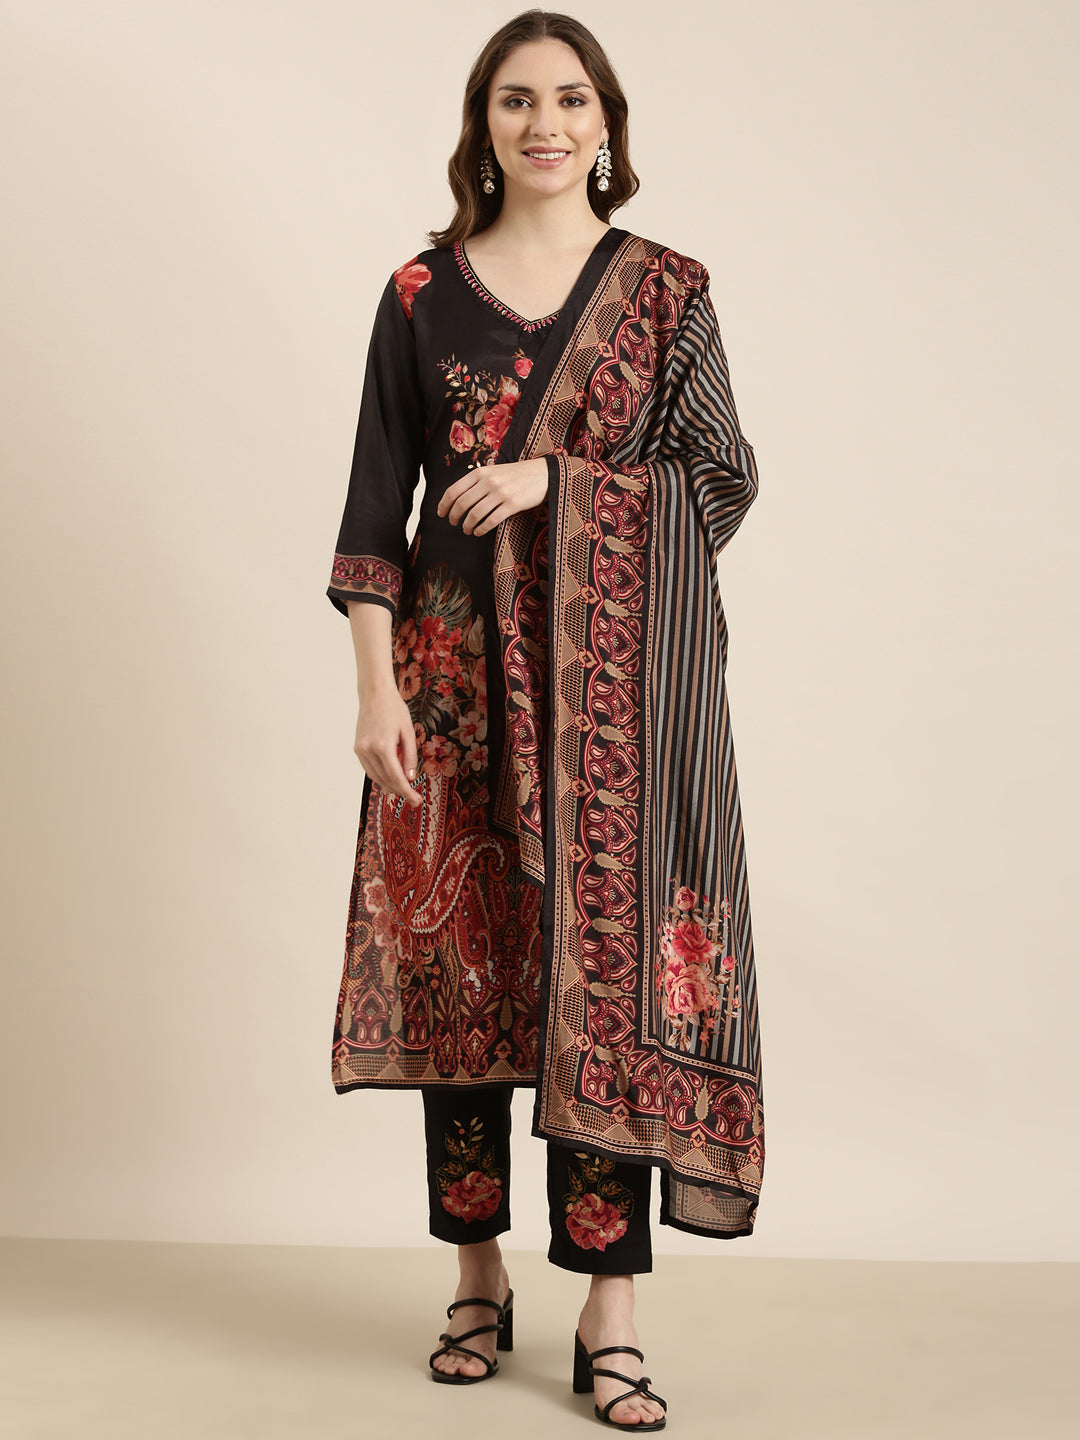 Women Straight Black Floral Kurta and Trousers Set Comes With Dupatta